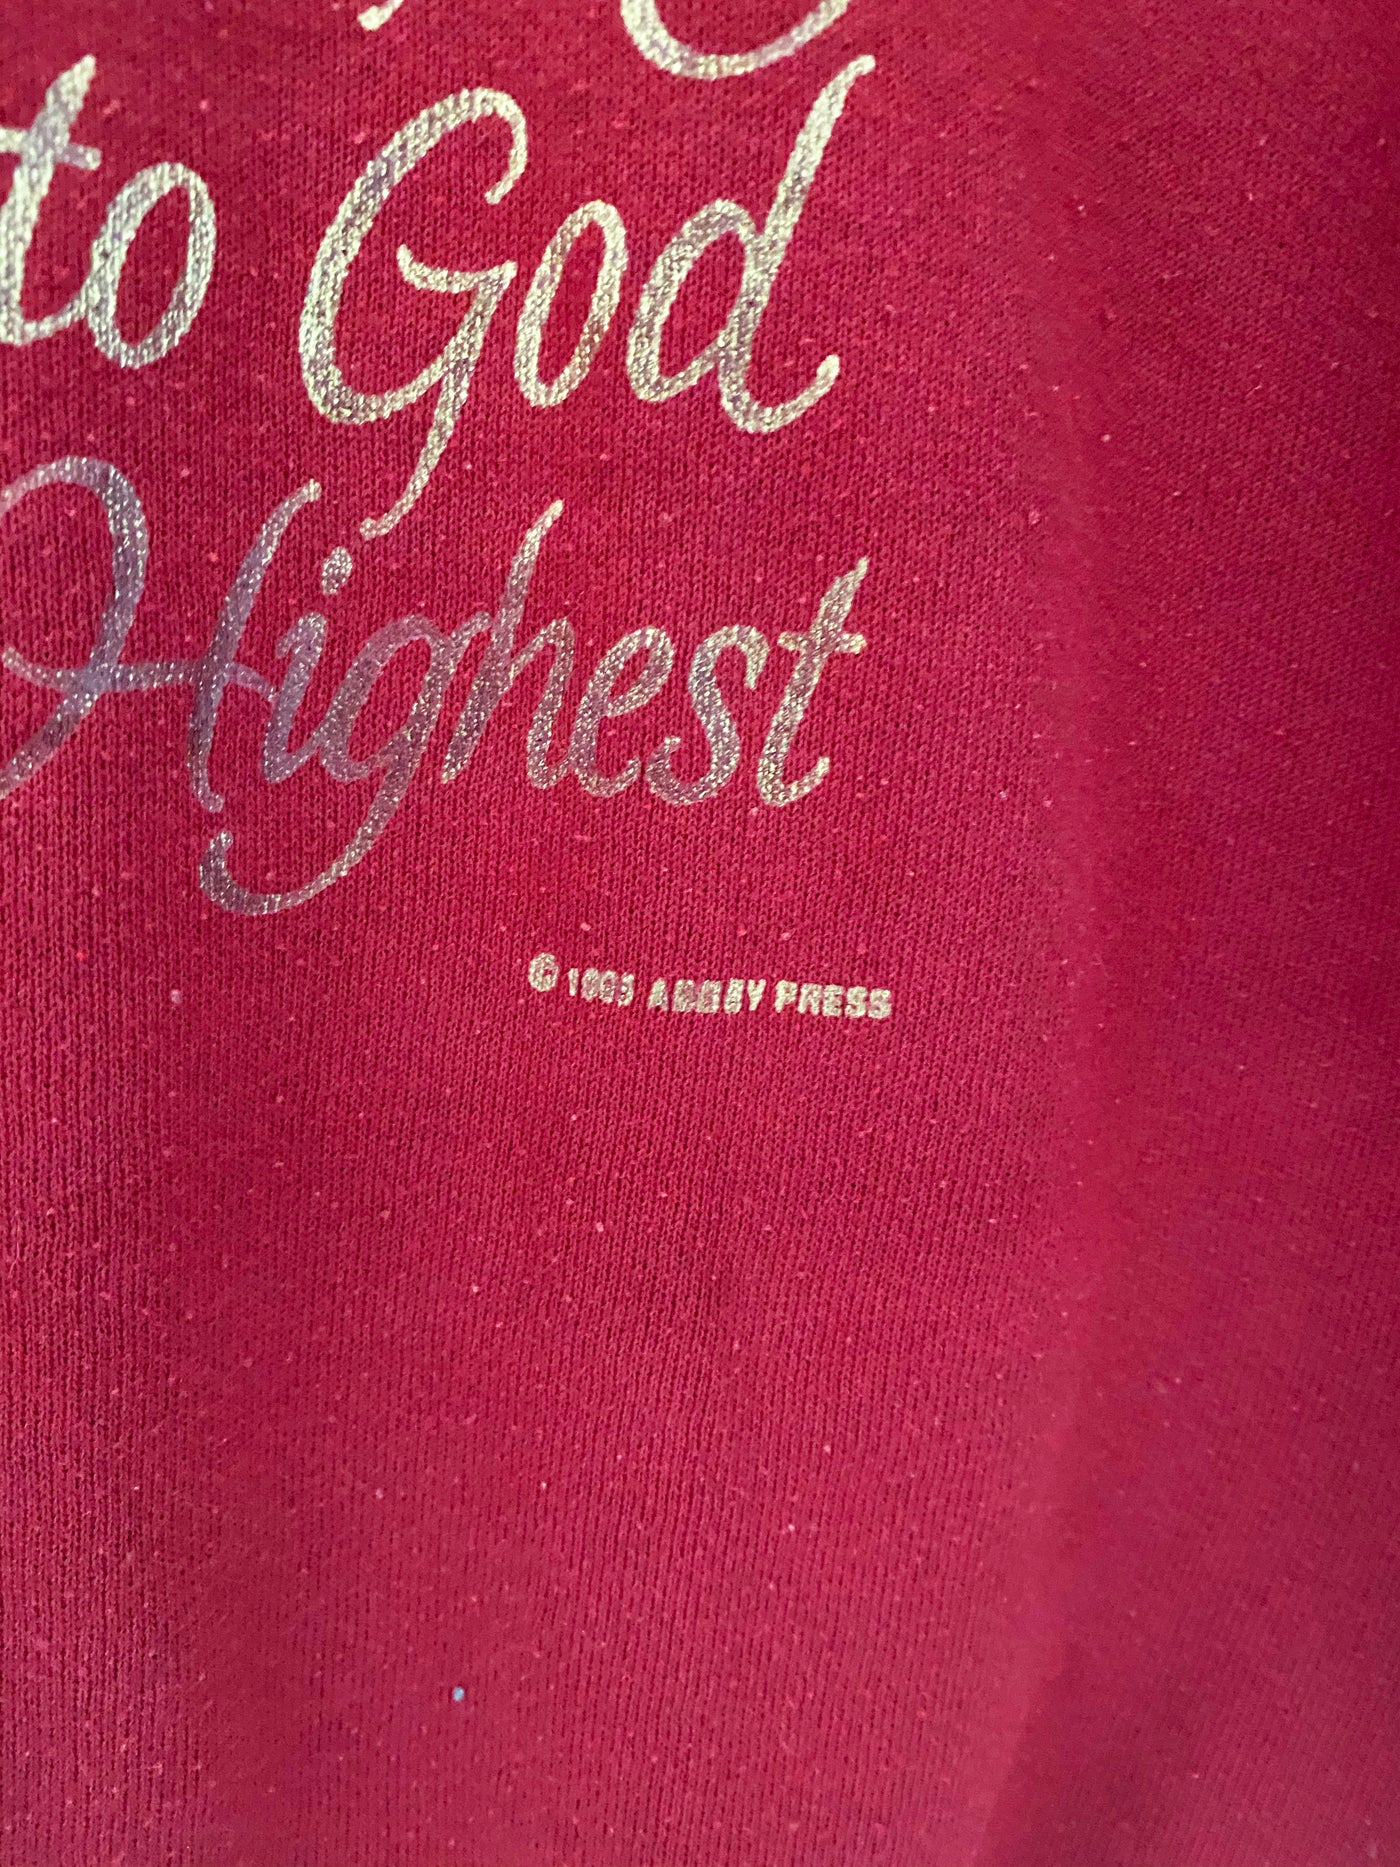 Vintage 1995 “Glory to God in the Highest” Crewneck